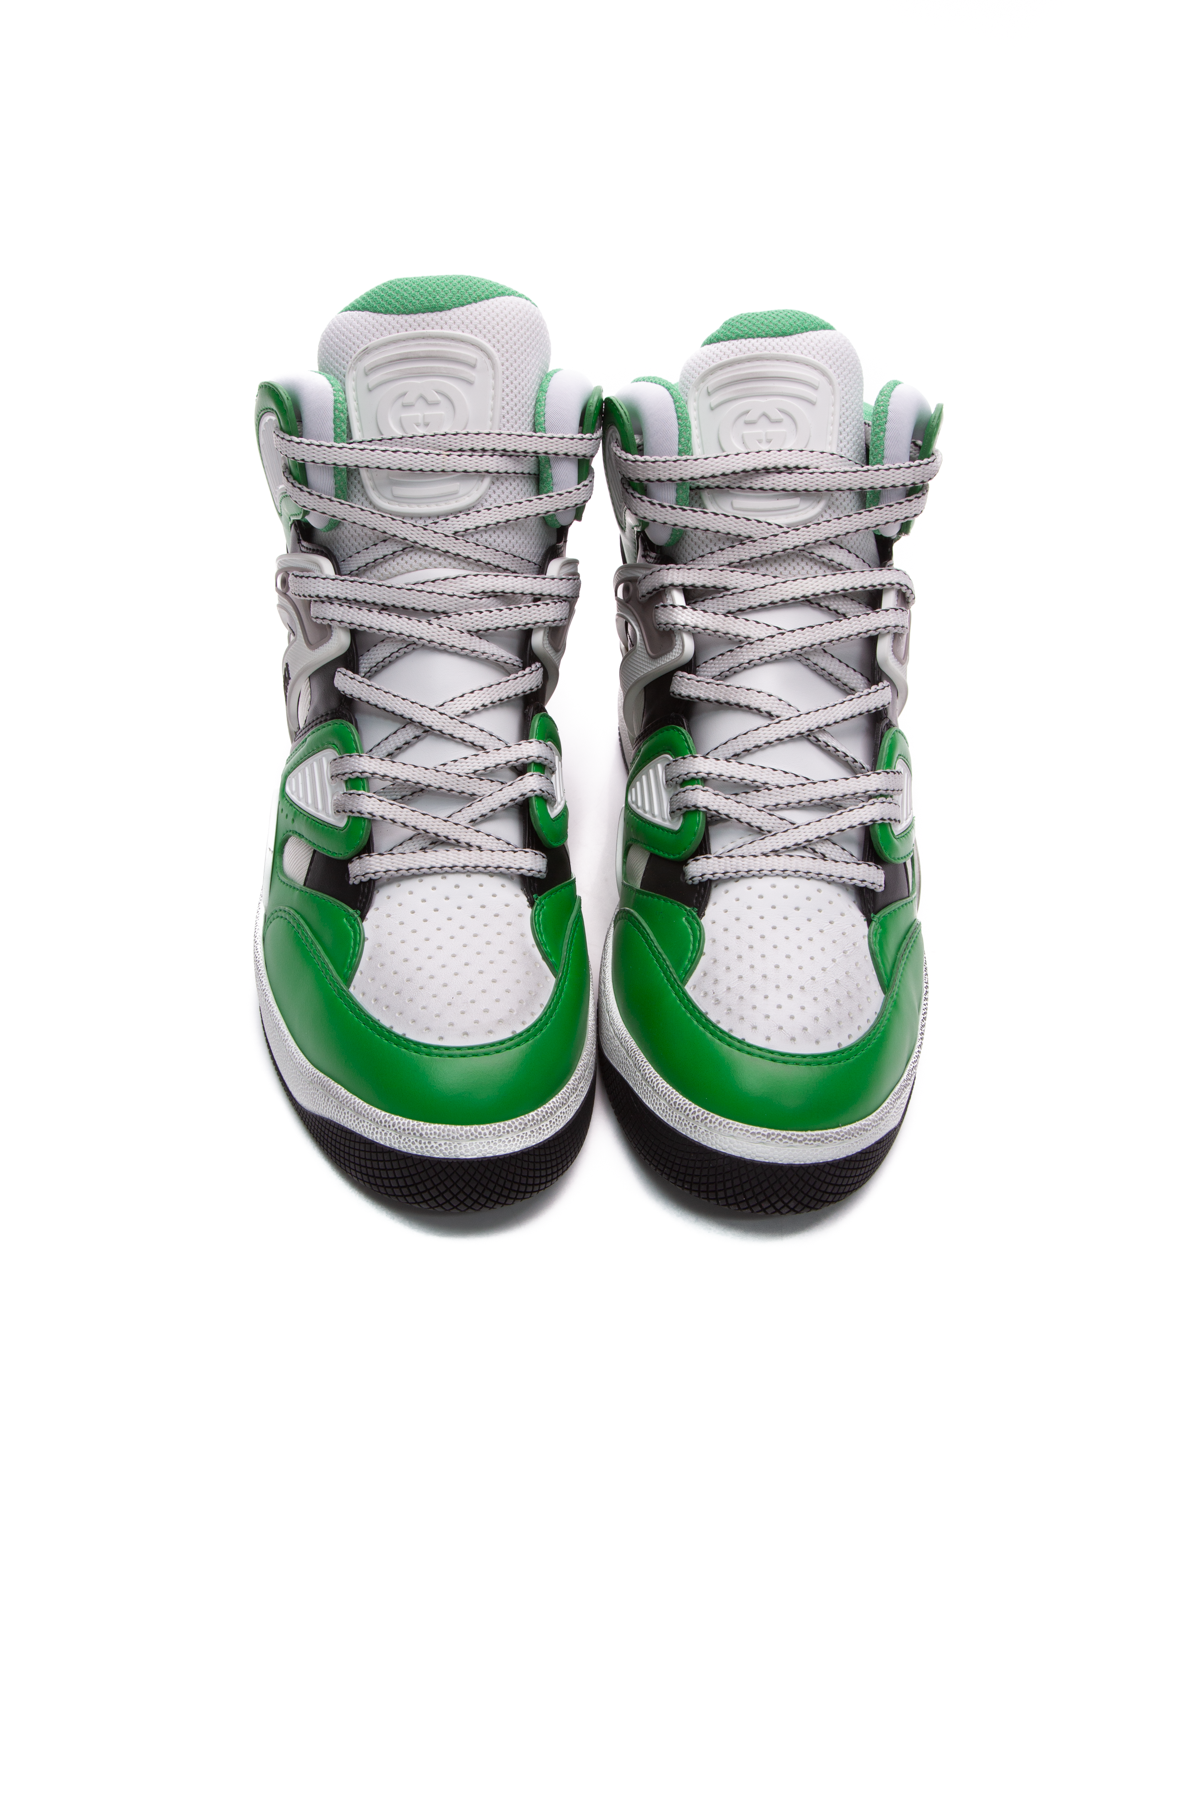 Gucci Green/White Basket High Top Sneakers - US Size 10.5